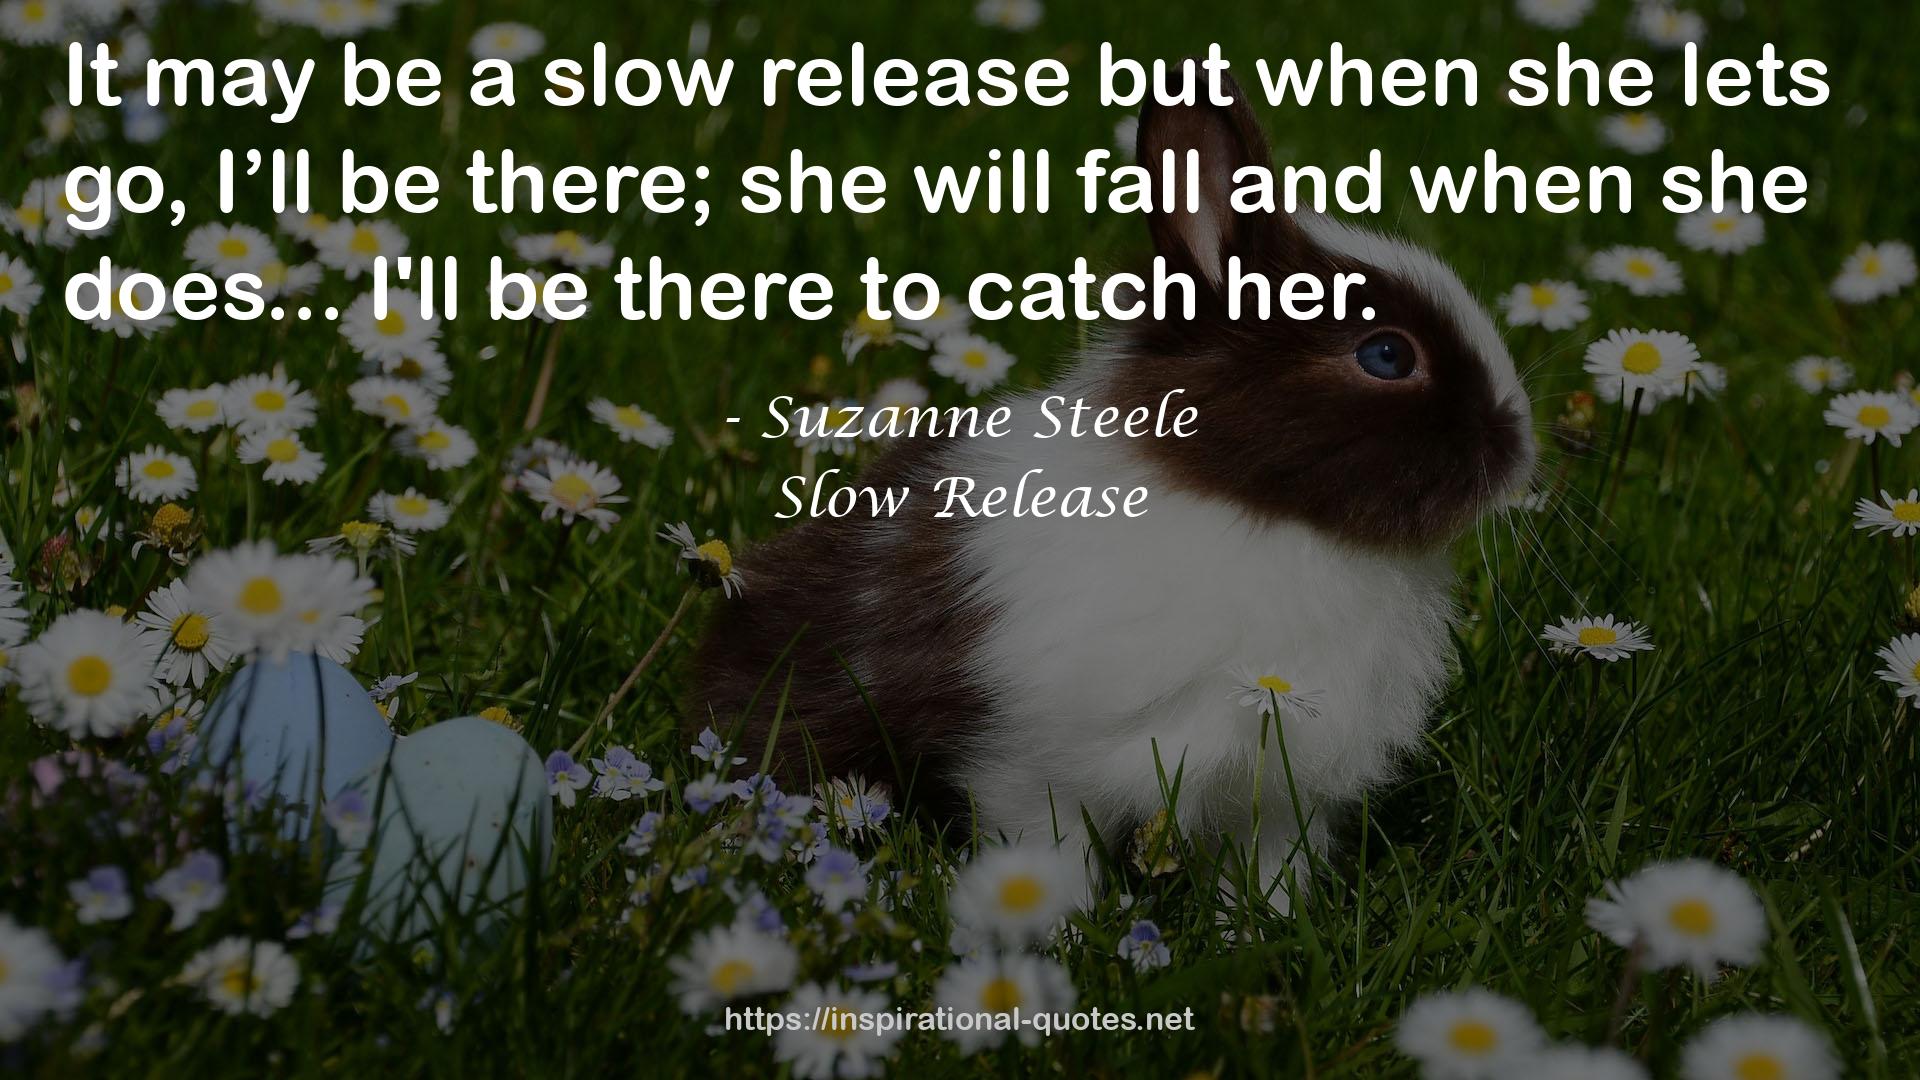 Slow Release QUOTES